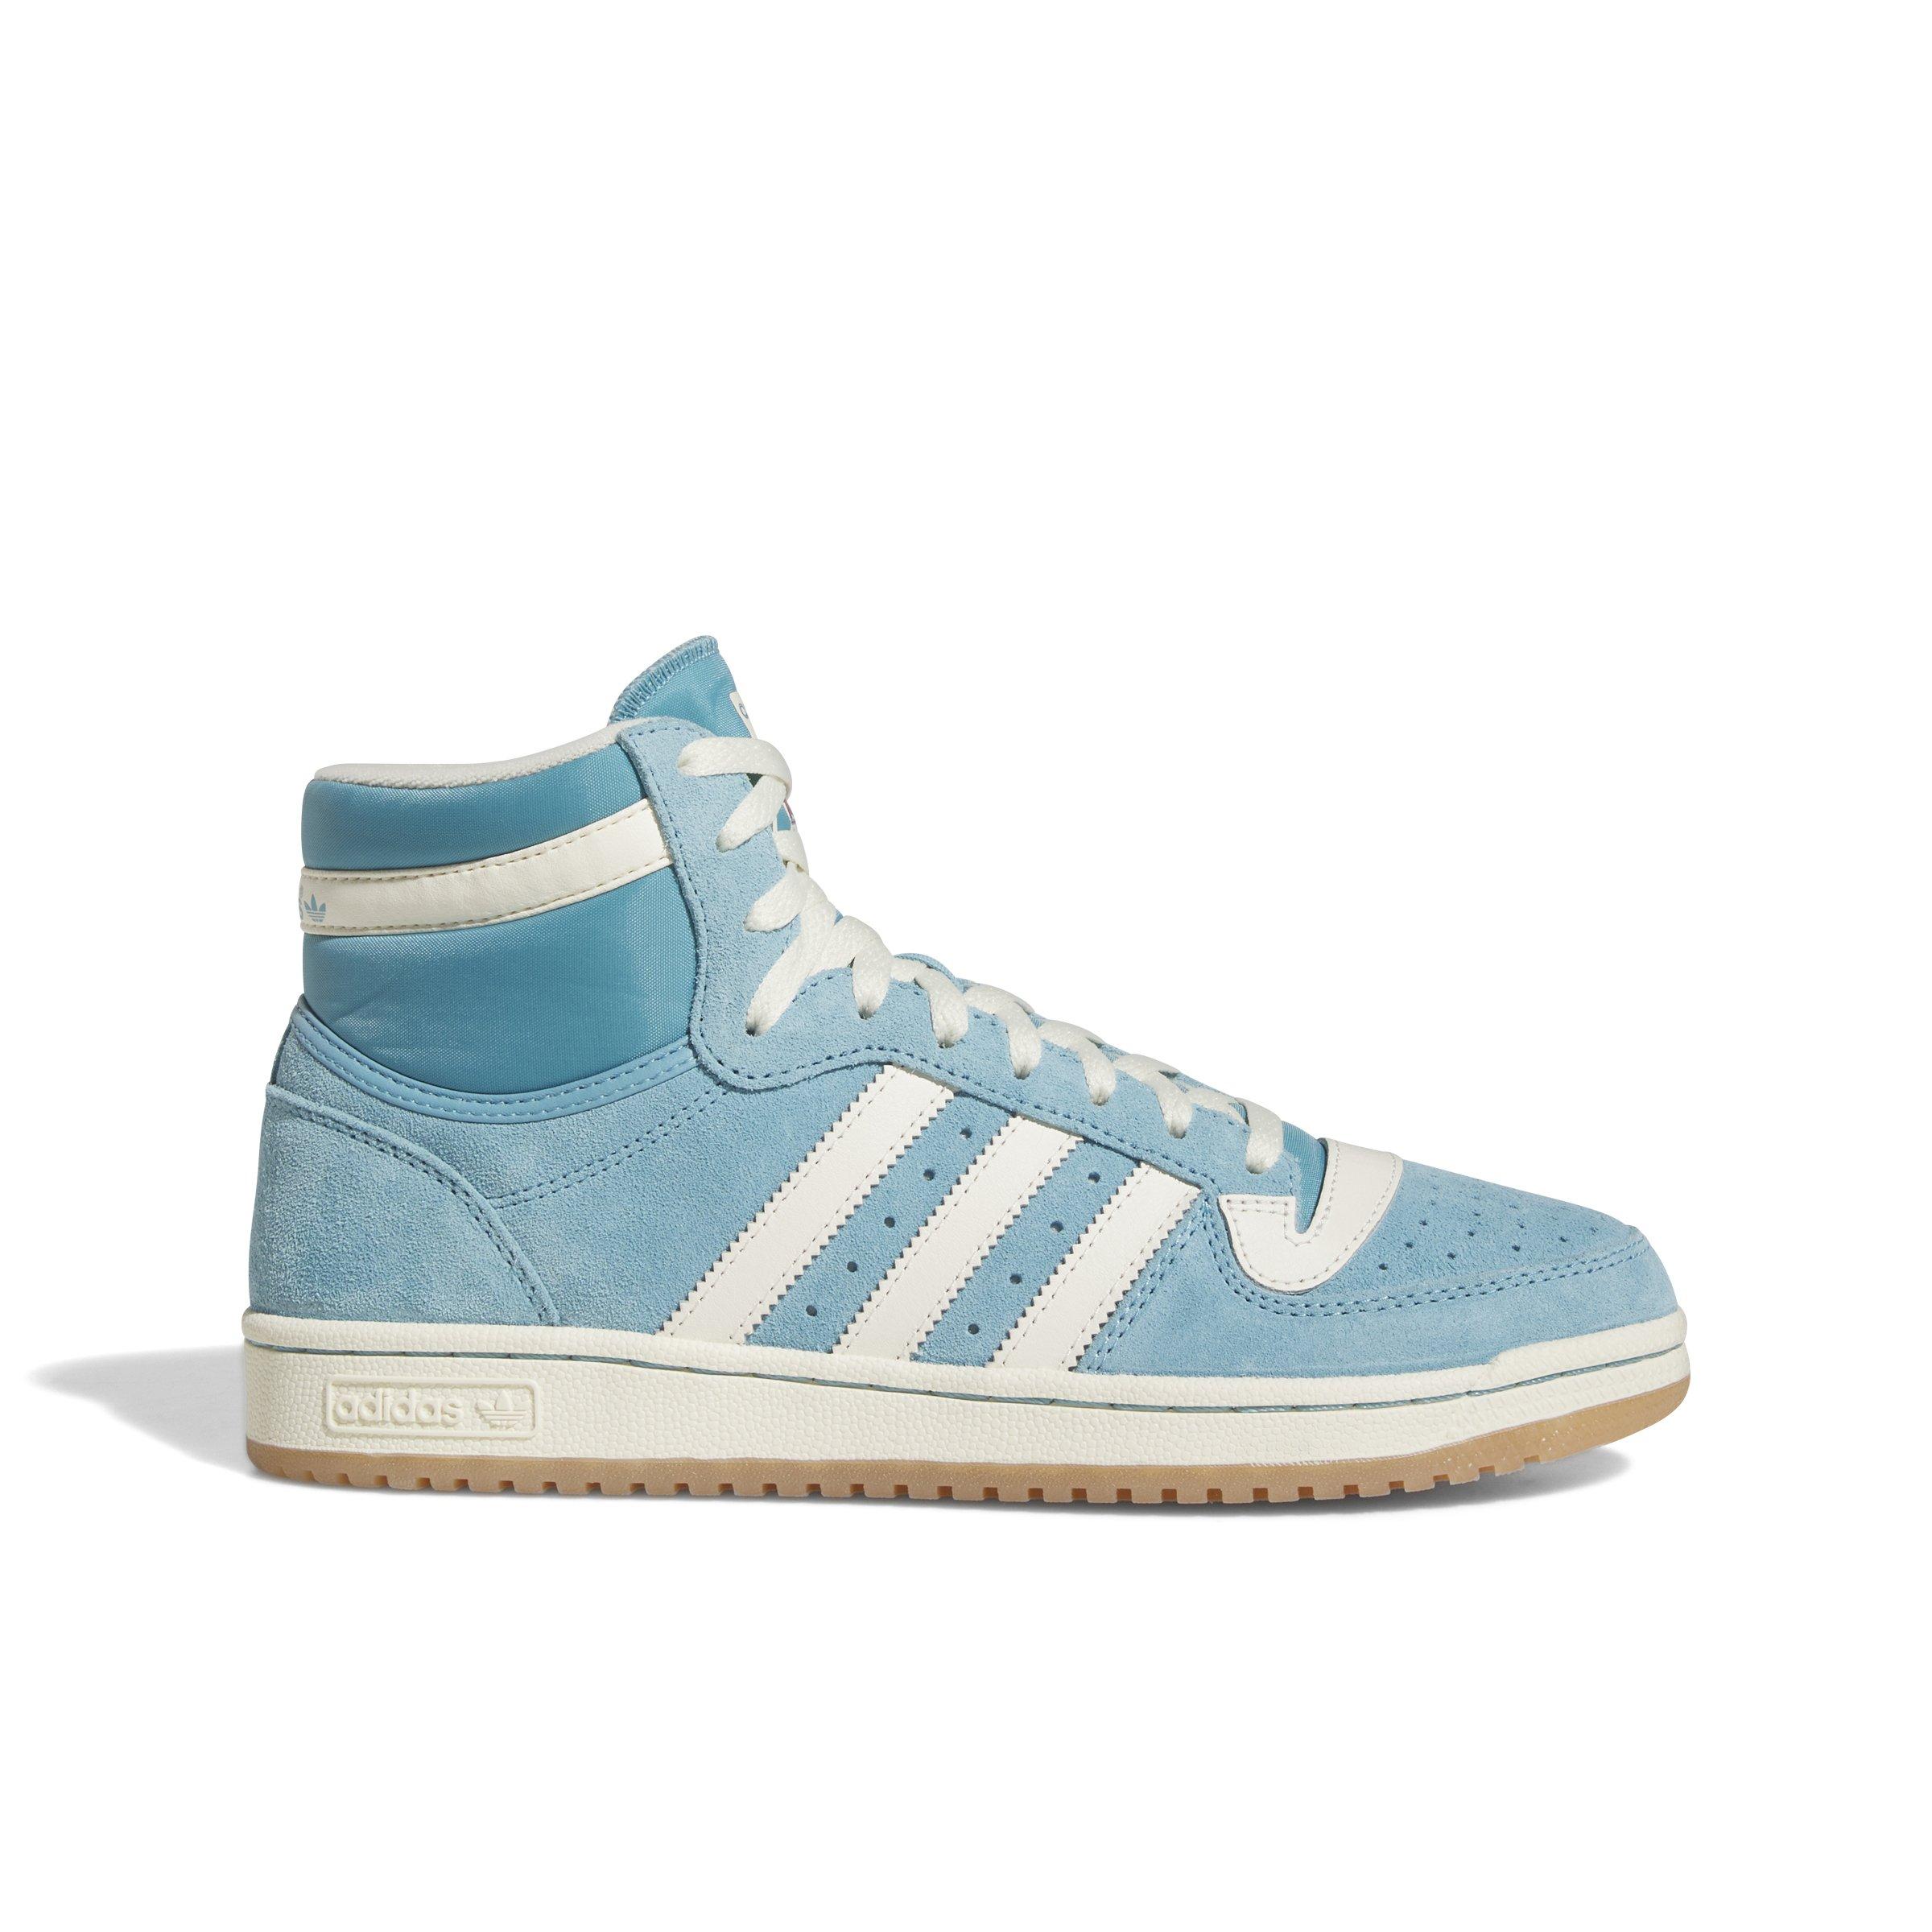 Adidas TOP TEN LO Men's Shoes White Blue Gold Lakers GY2515